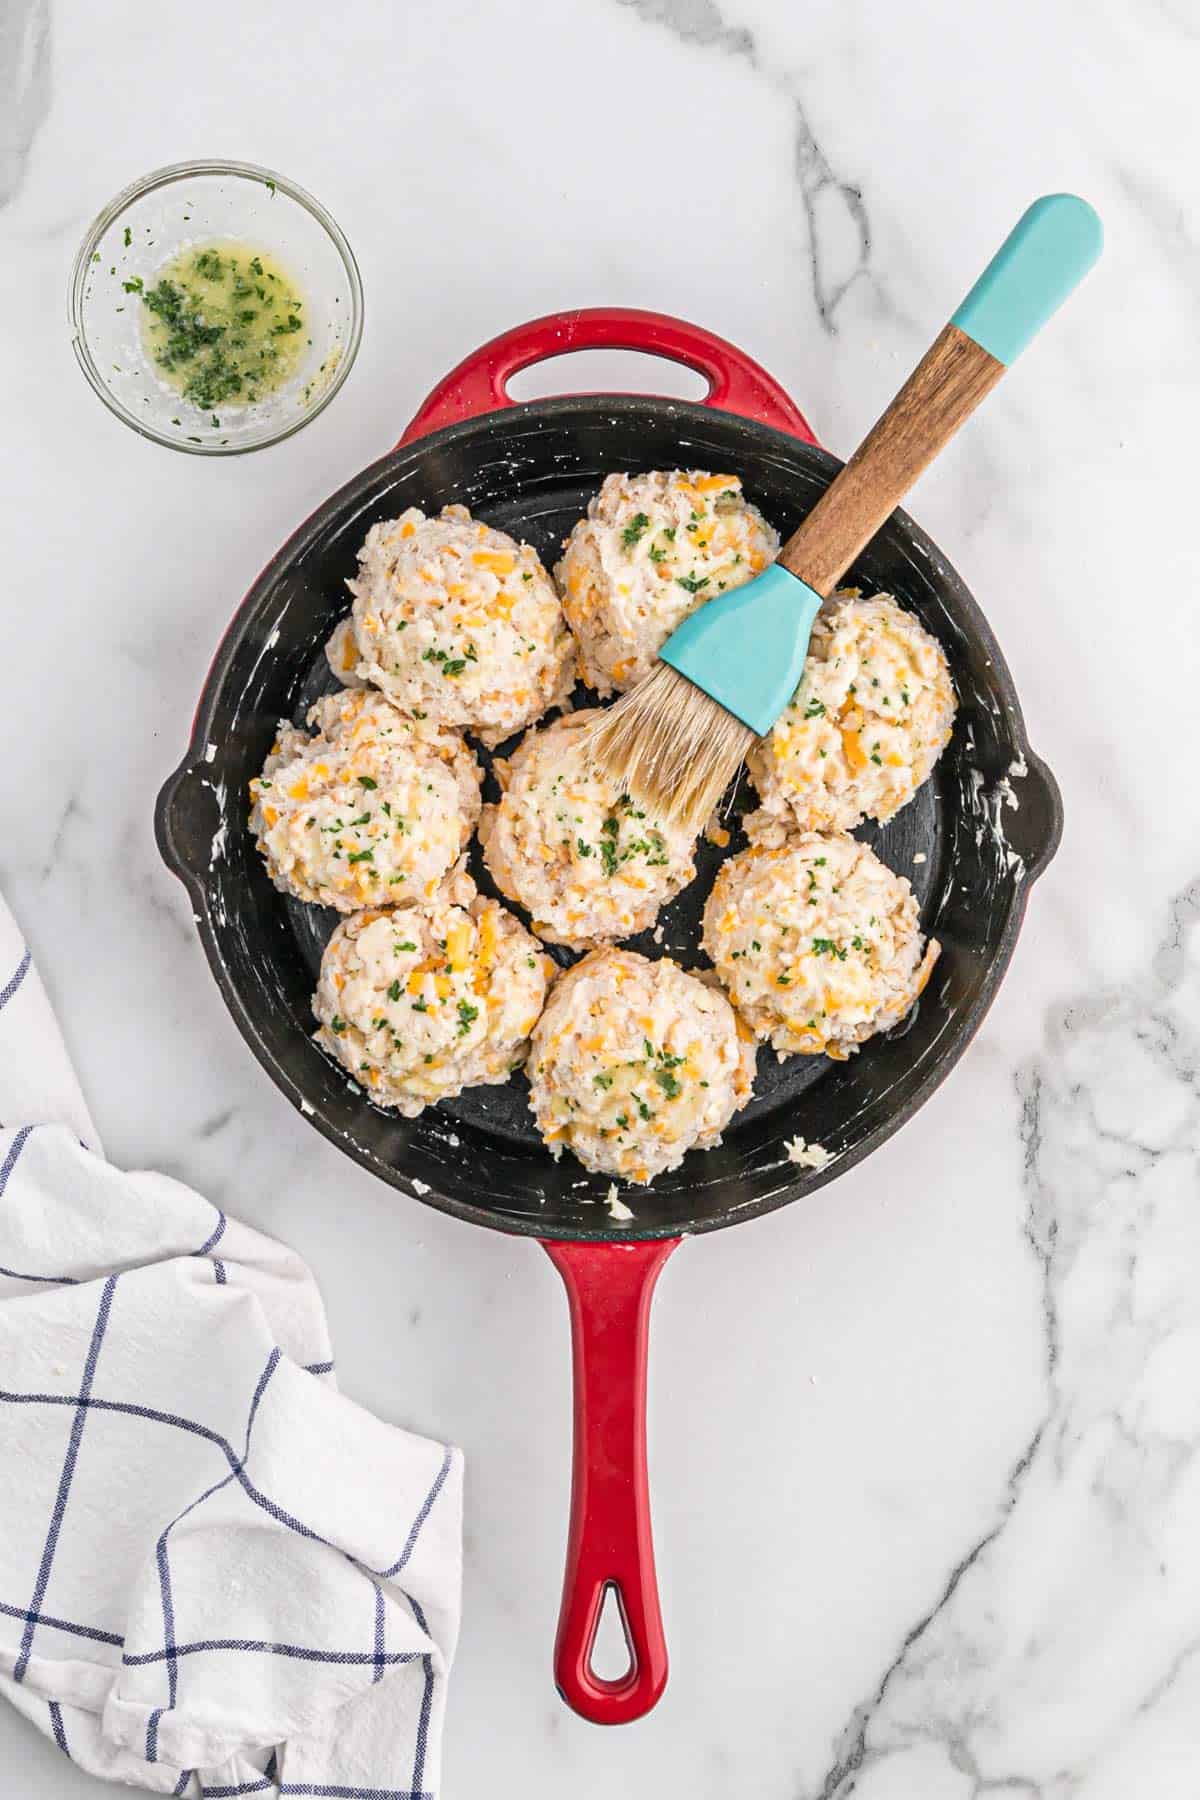 A pastry brush on top of the cheddar garlic biscuits in a cast iron pan.